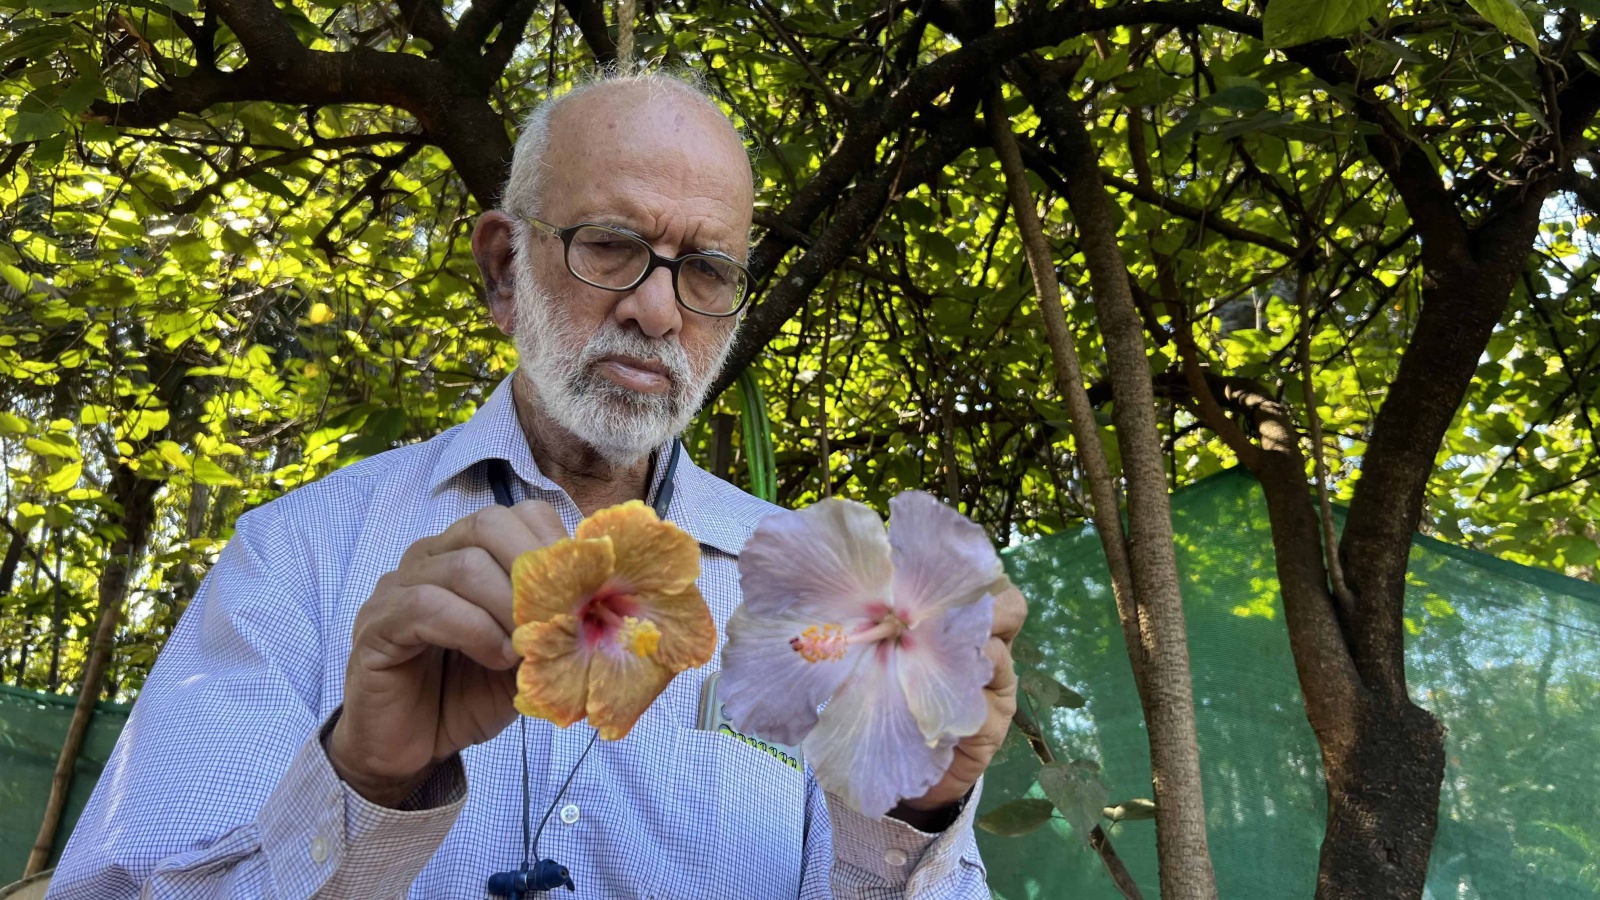 urrounded by the winter burst of vibrant flowers, Champhekar looks at them with pride, as he’s become quite the master grafter whose Ameya Nursery has become the go-to spot for Pune’s plant lovers.